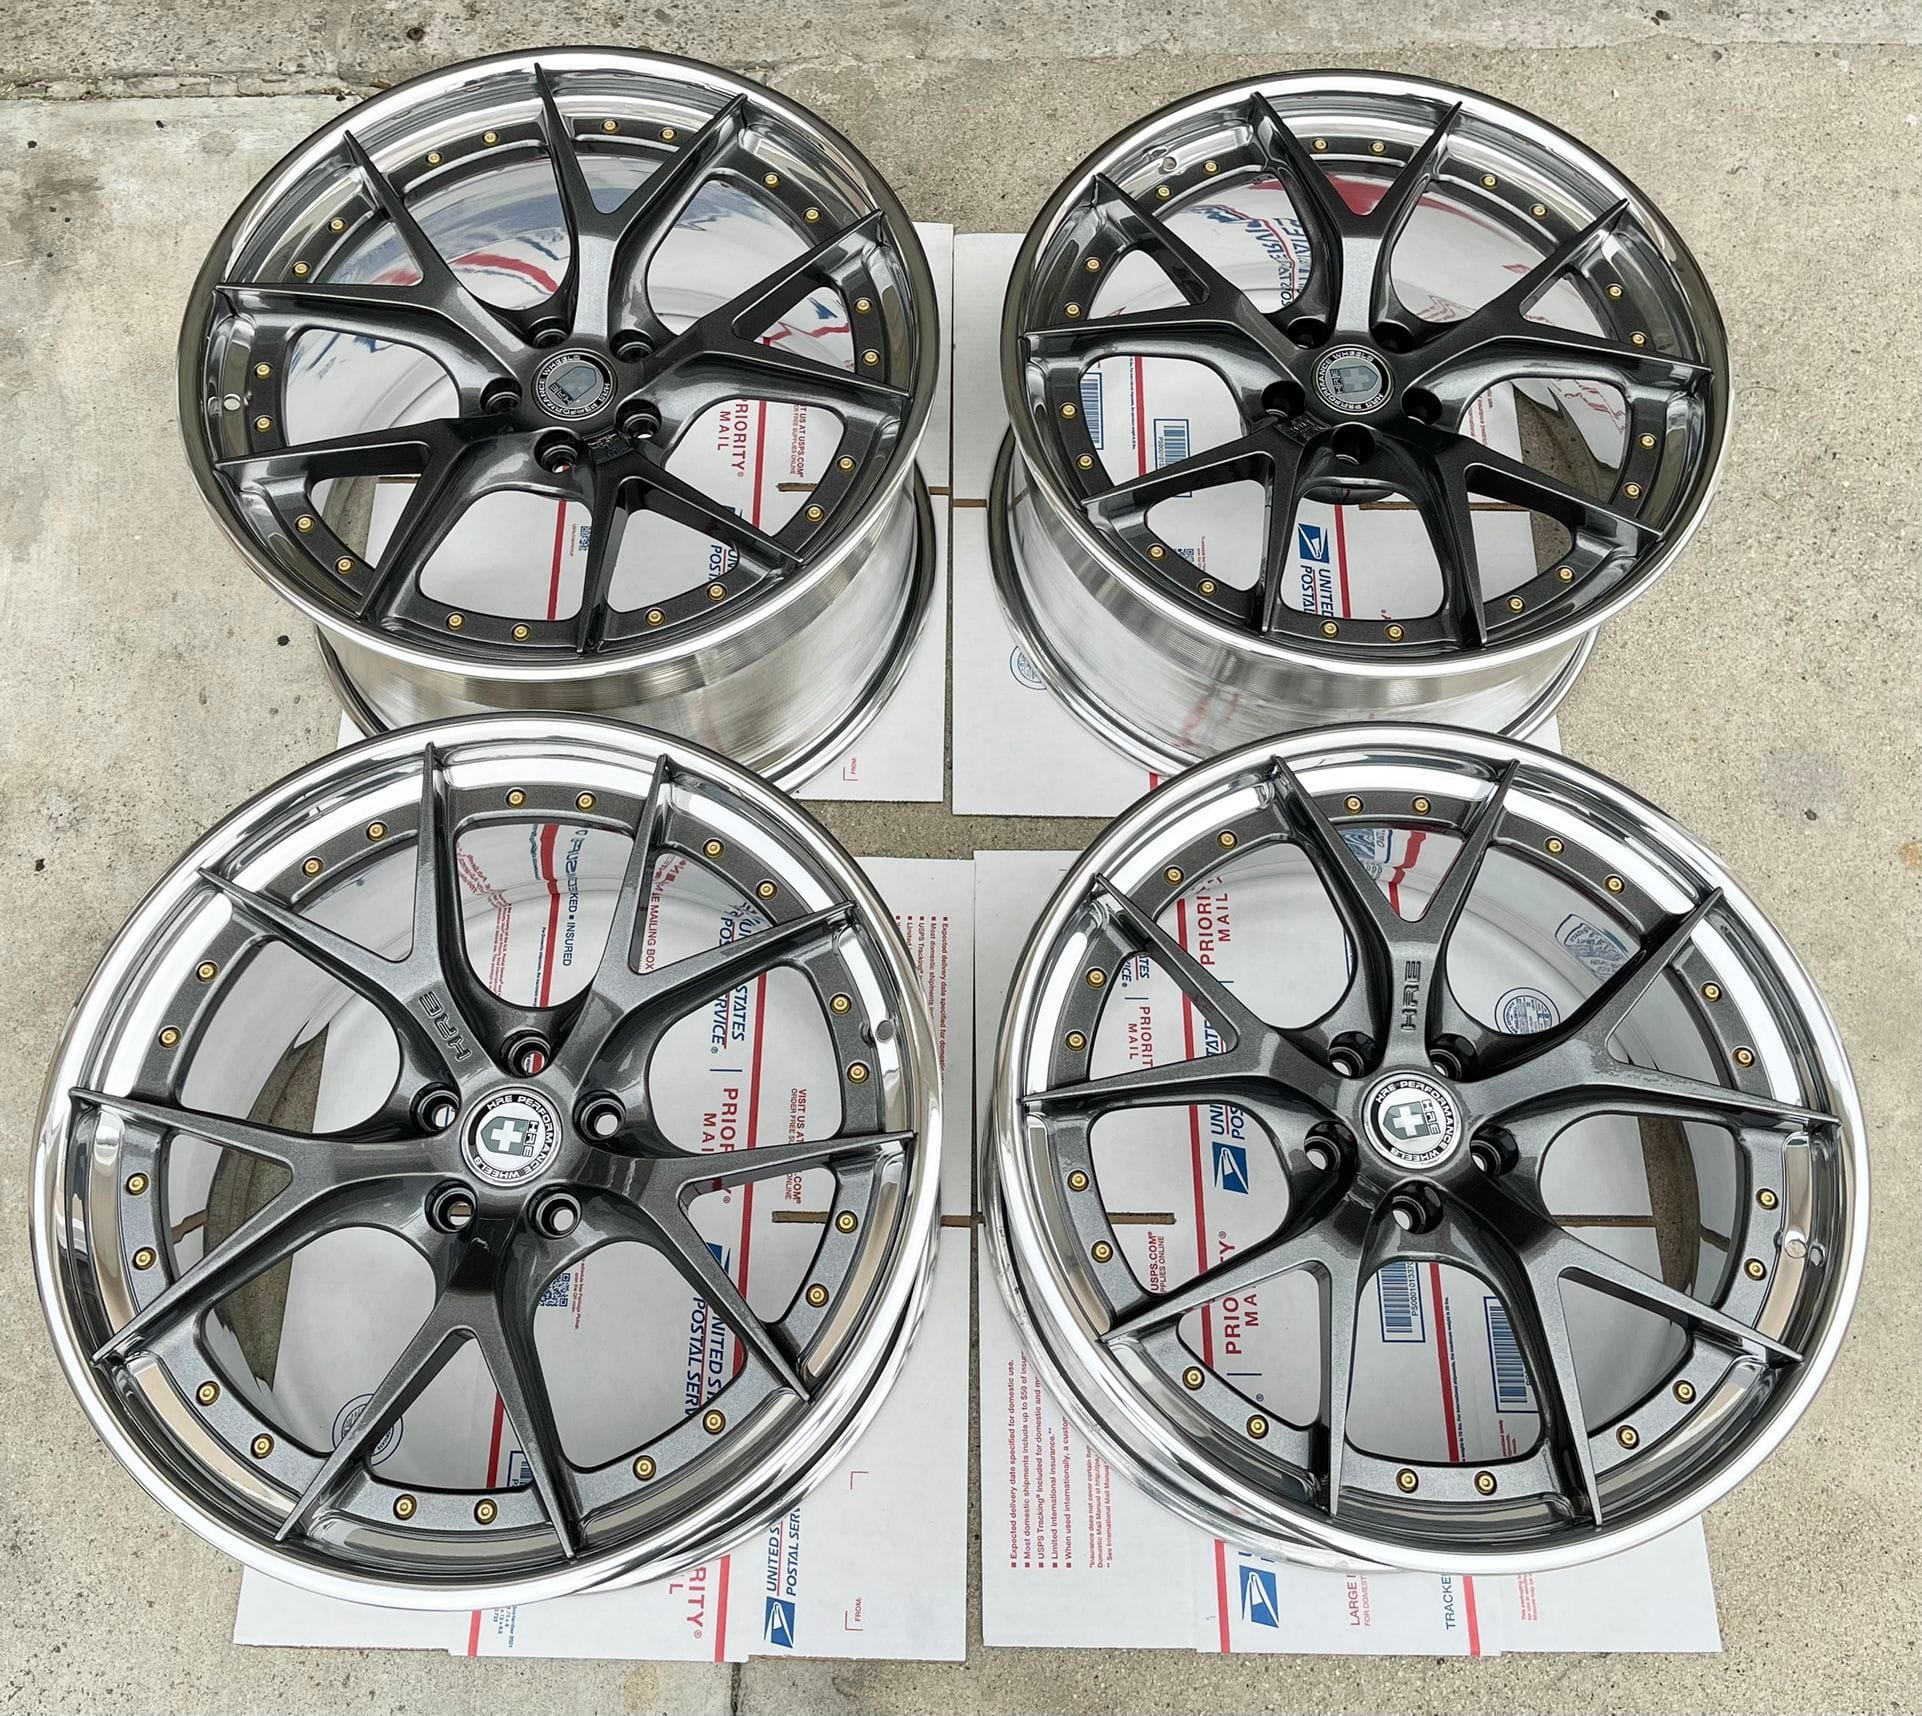 Wheels and Tires/Axles - HRE 3PC S101 Brand New - New - 0  All Models - San Diego, CA 92026, United States